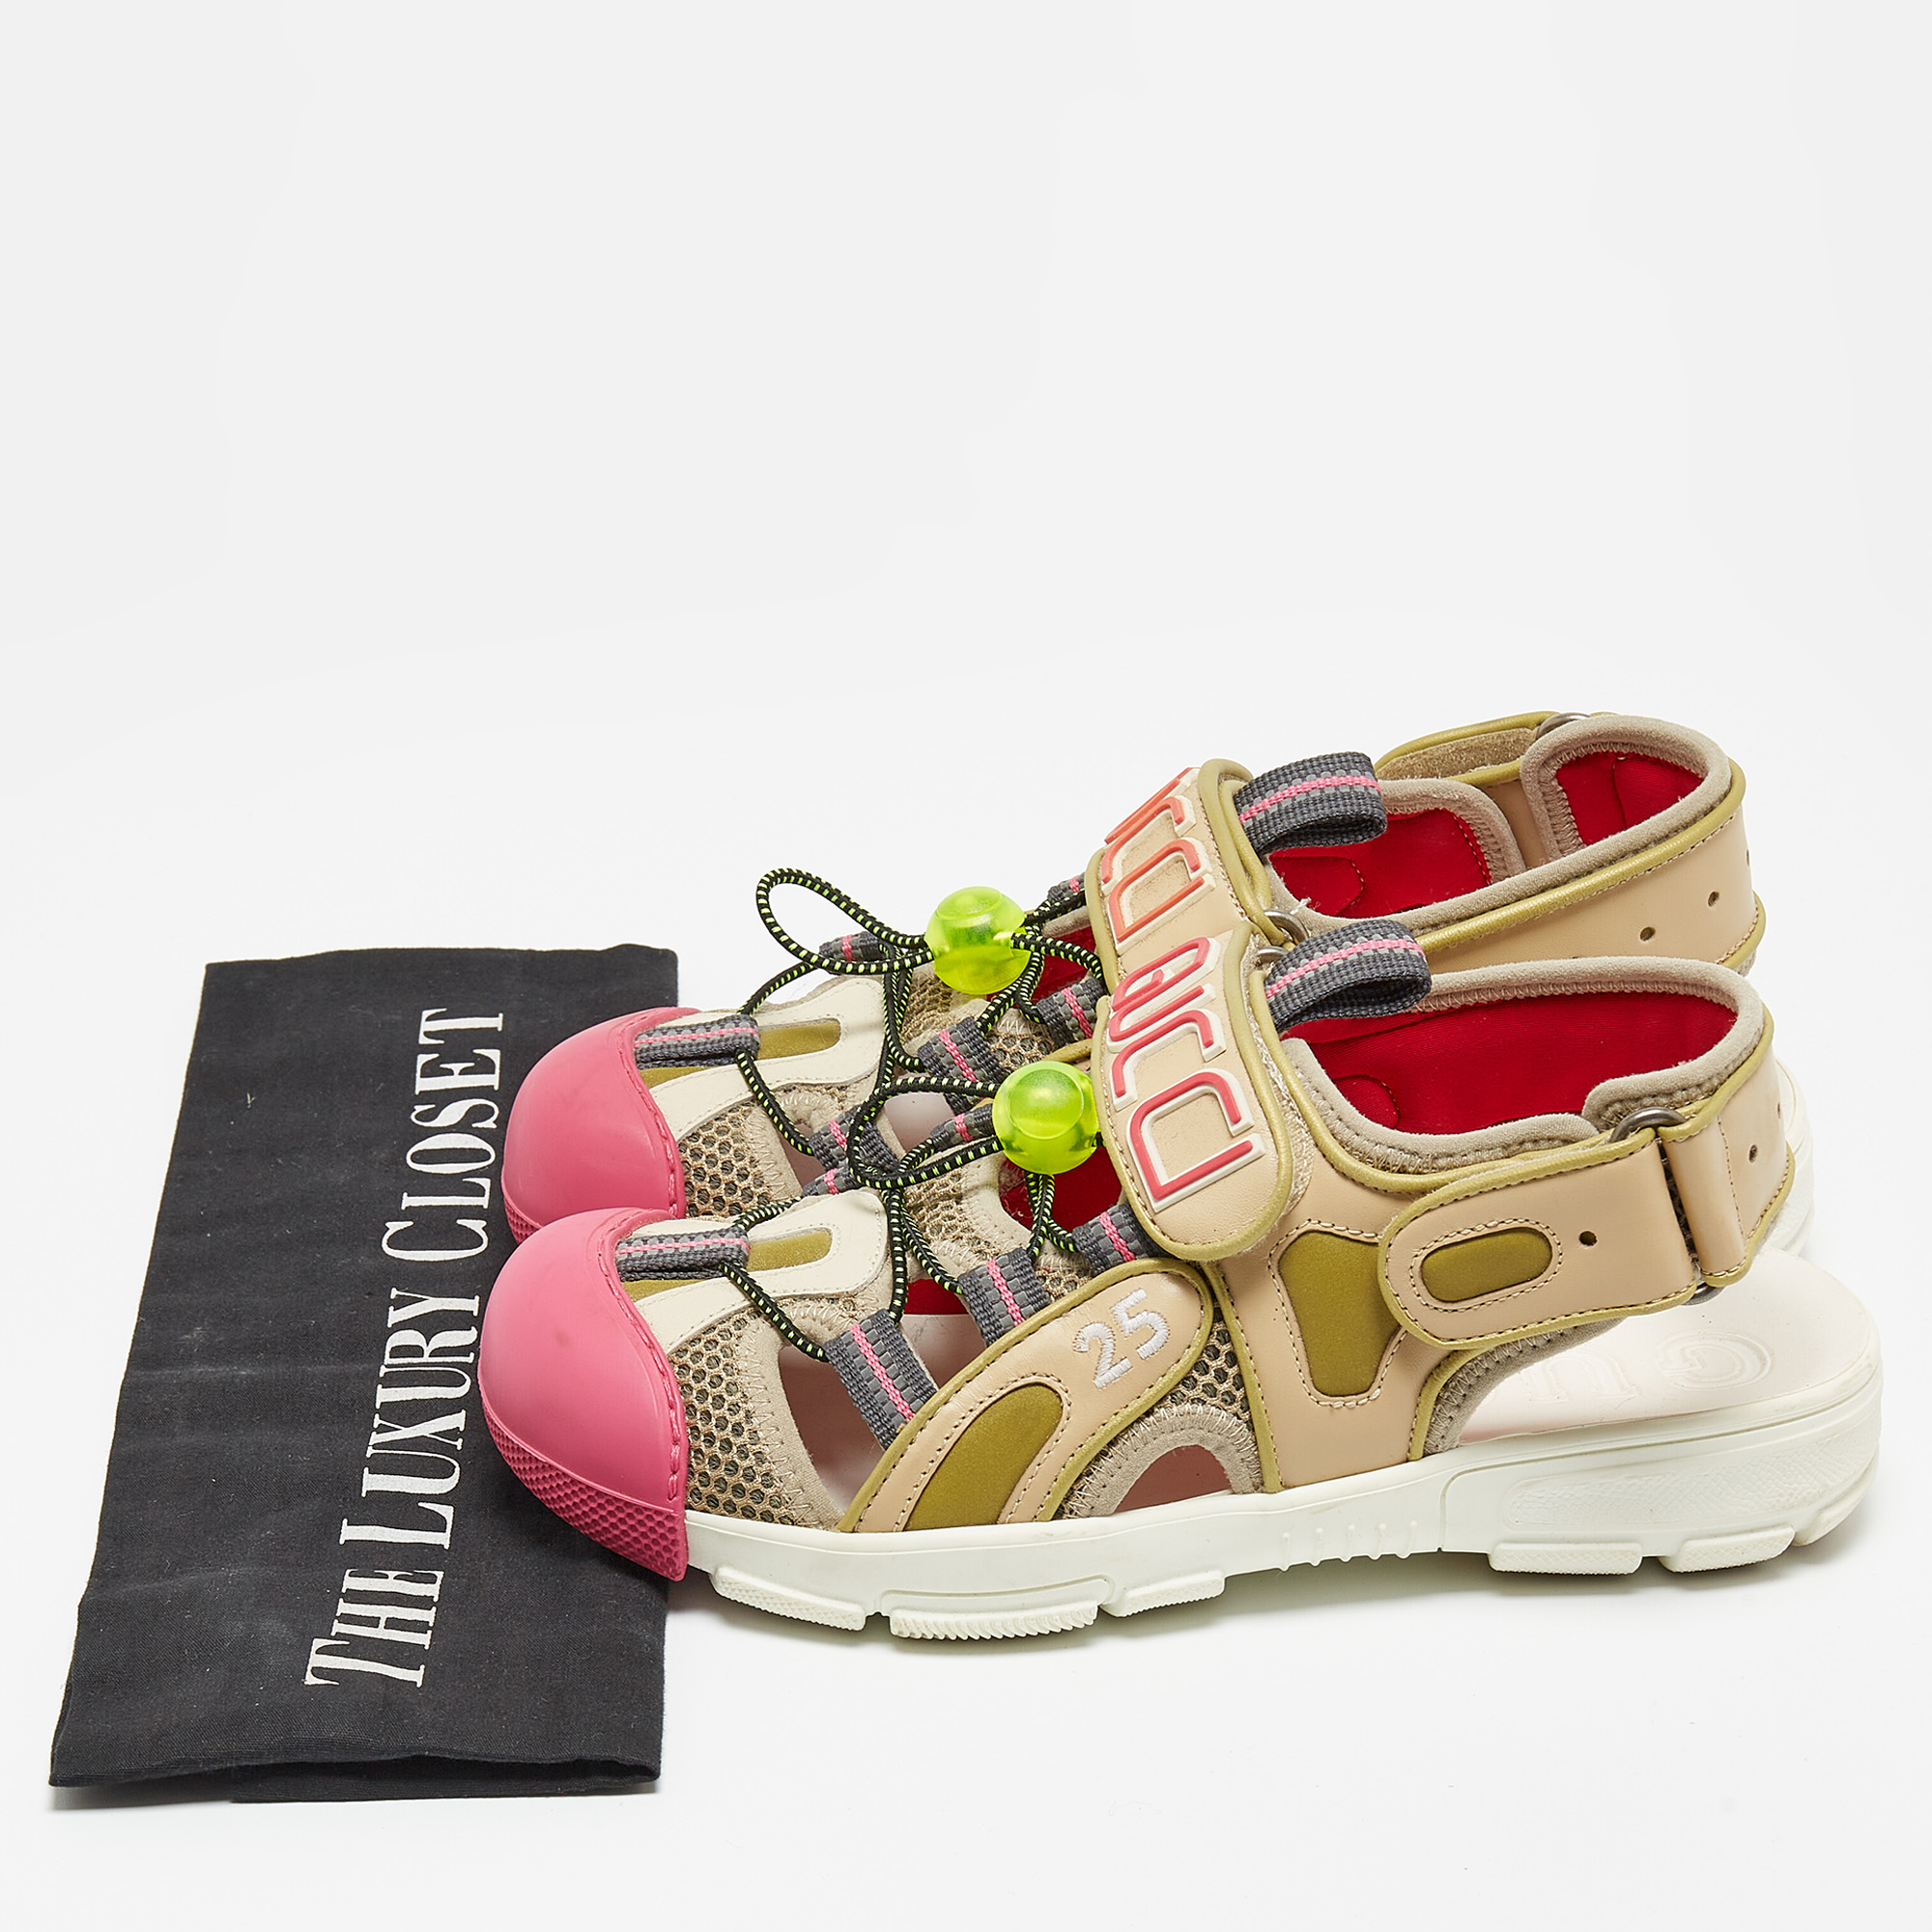 Gucci Multicolor Leather And Mesh Tinsel Sandals Size 35.5